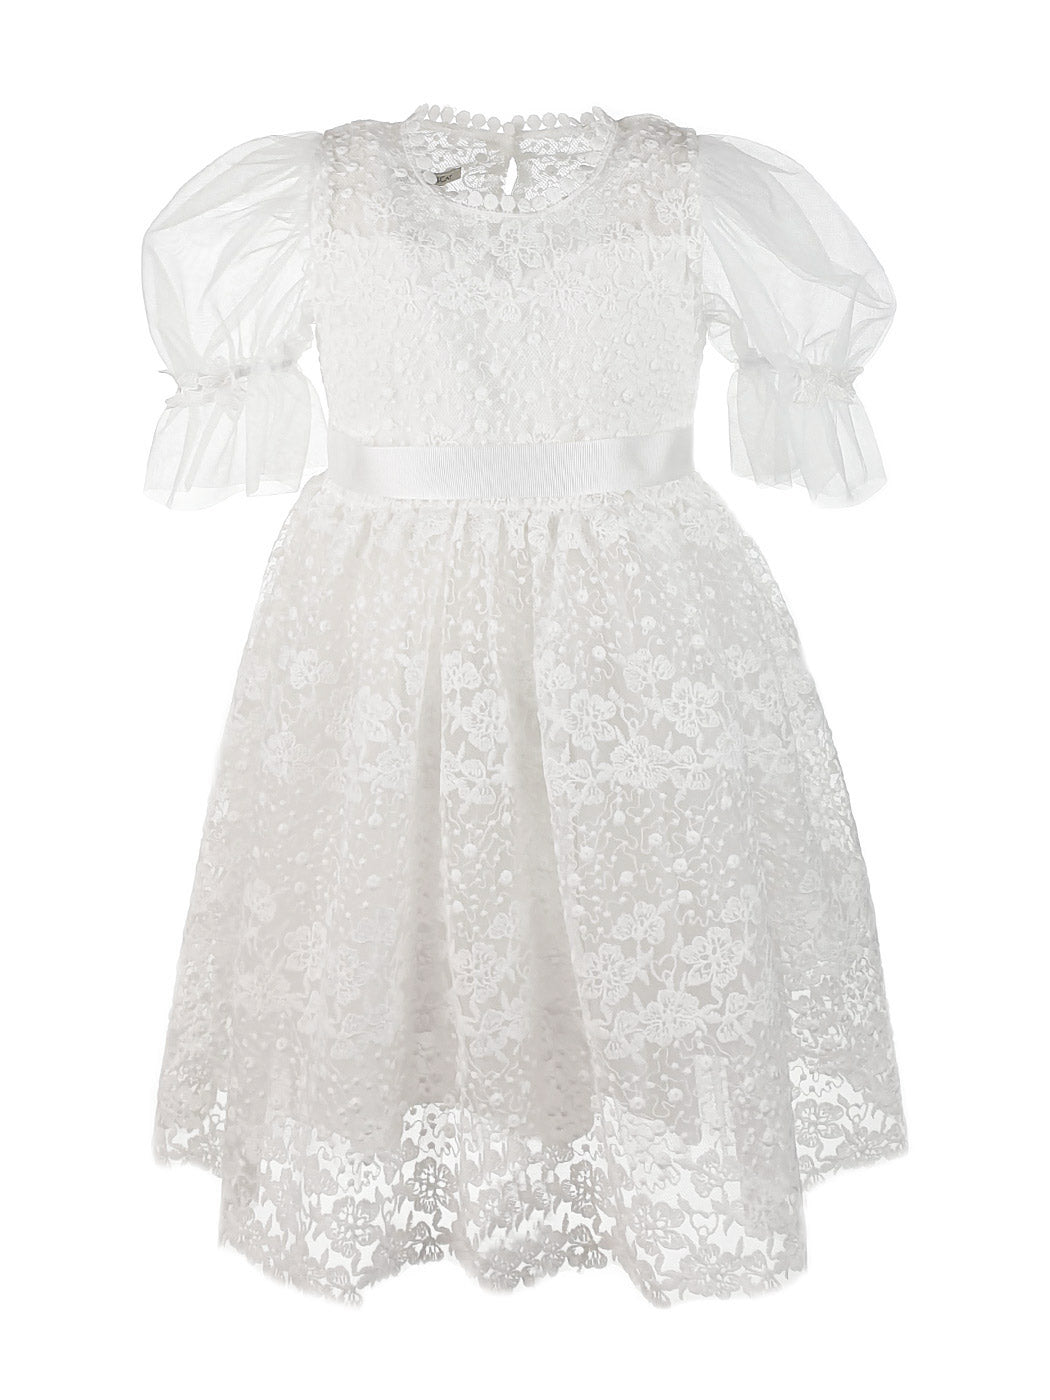 Girl's lace Dress with long sleeves - TENYA-White